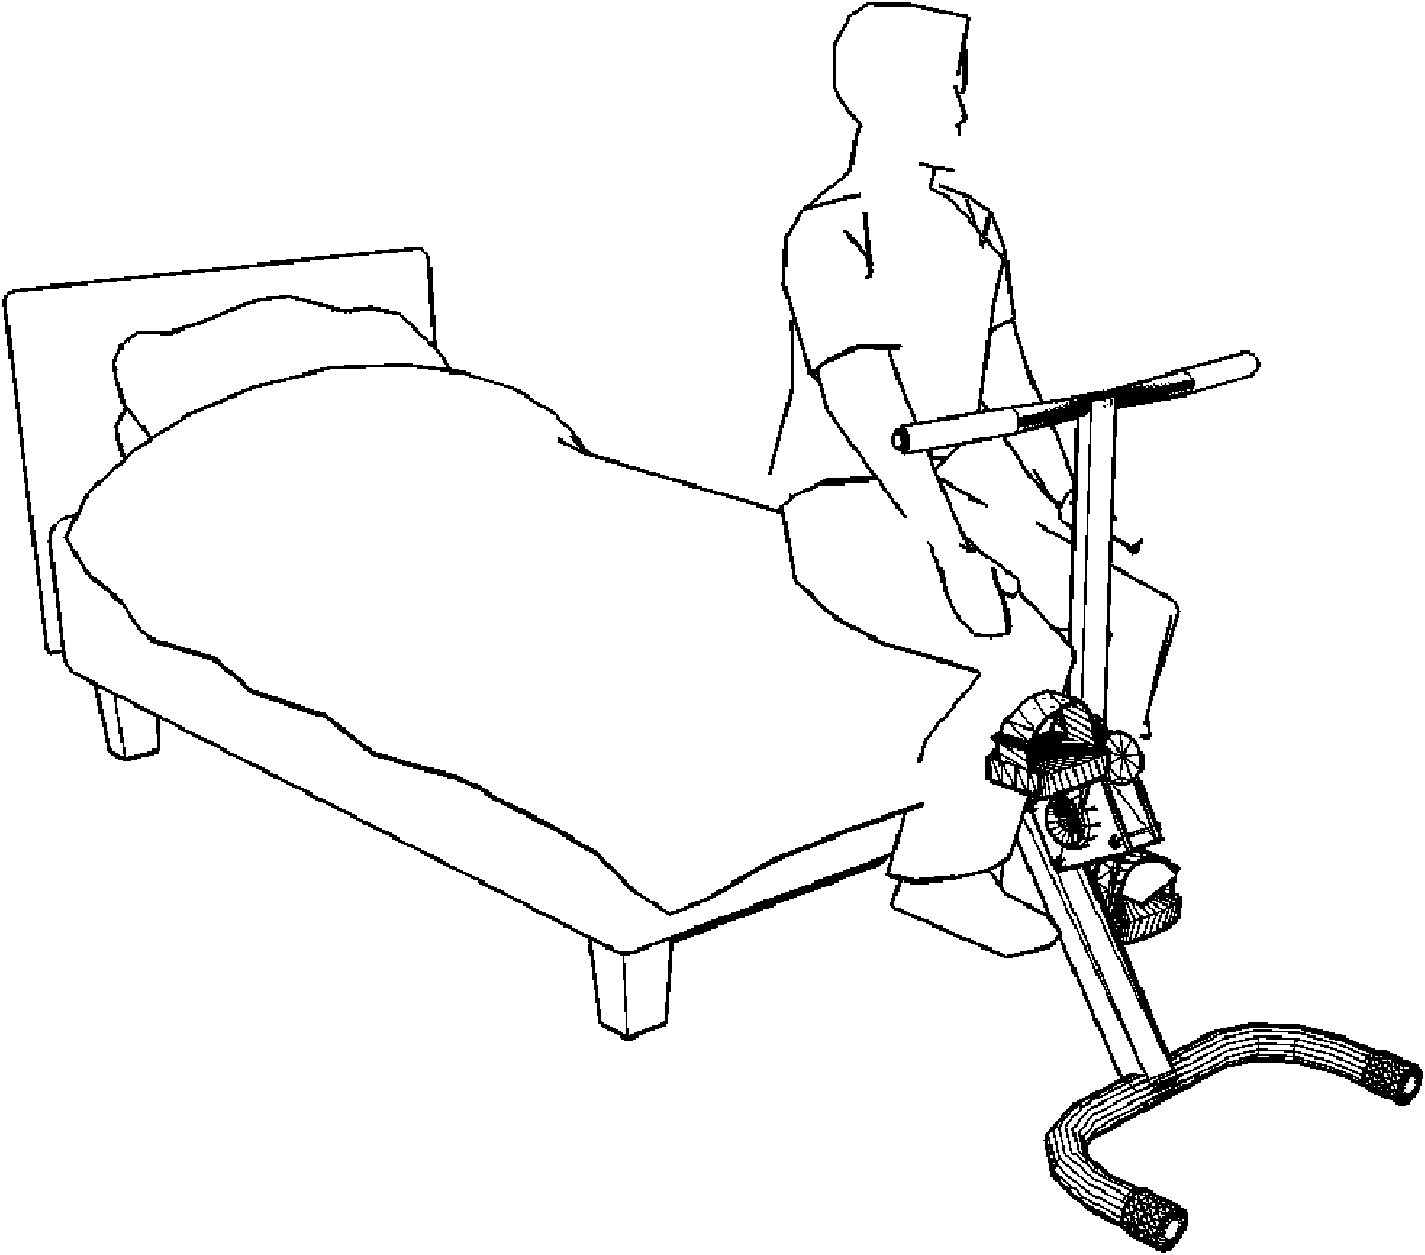 Load-free knee joint function rehabilitation device